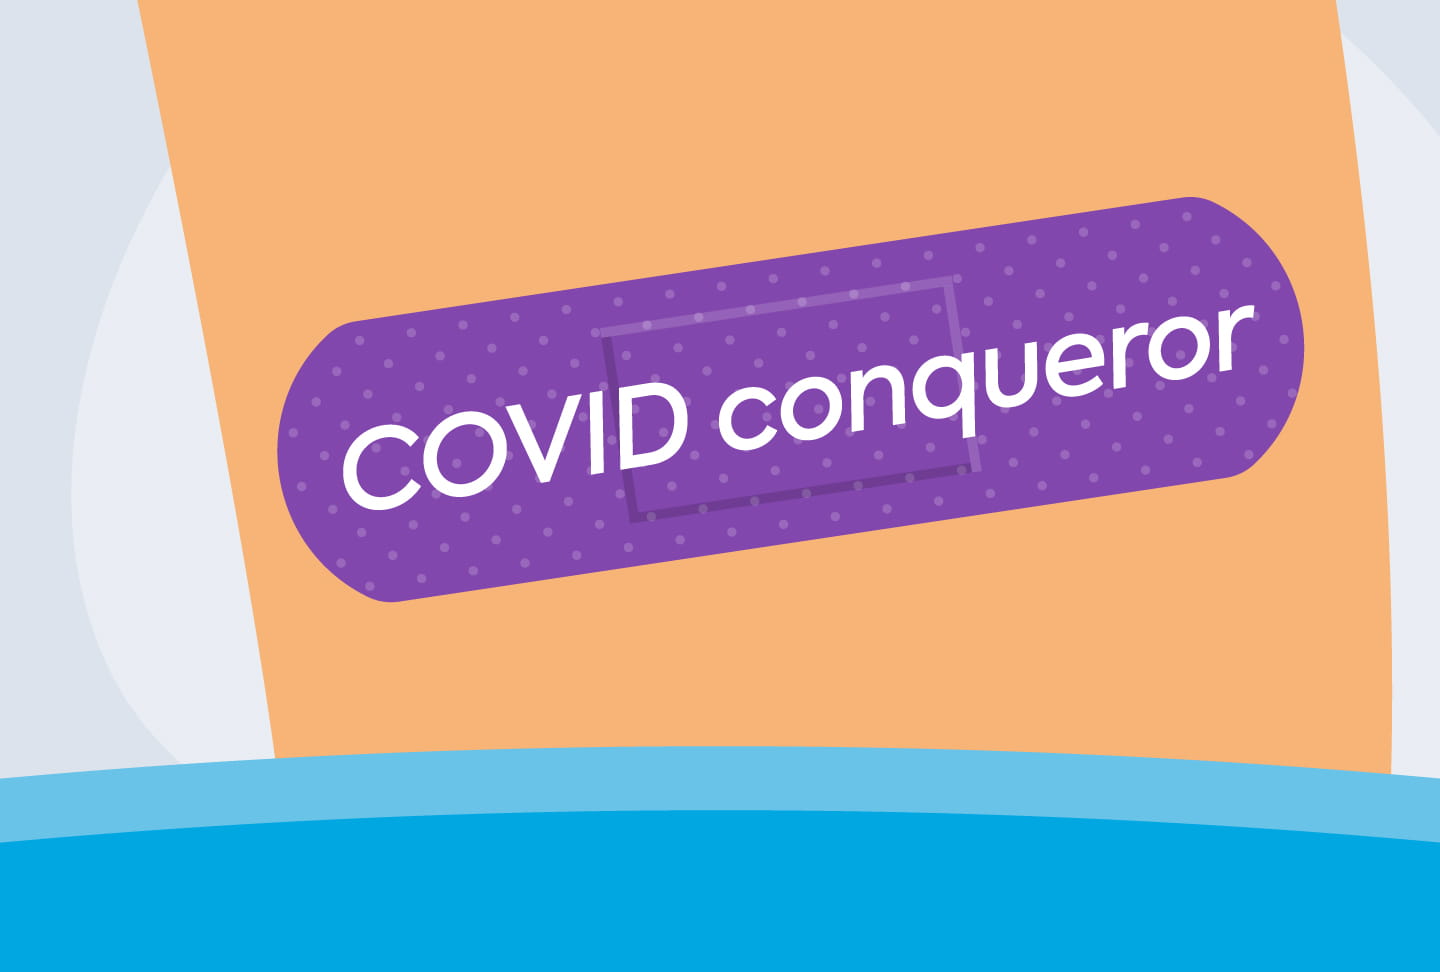 Illustration of arm with purple bandage that reads "COVID conqueror"